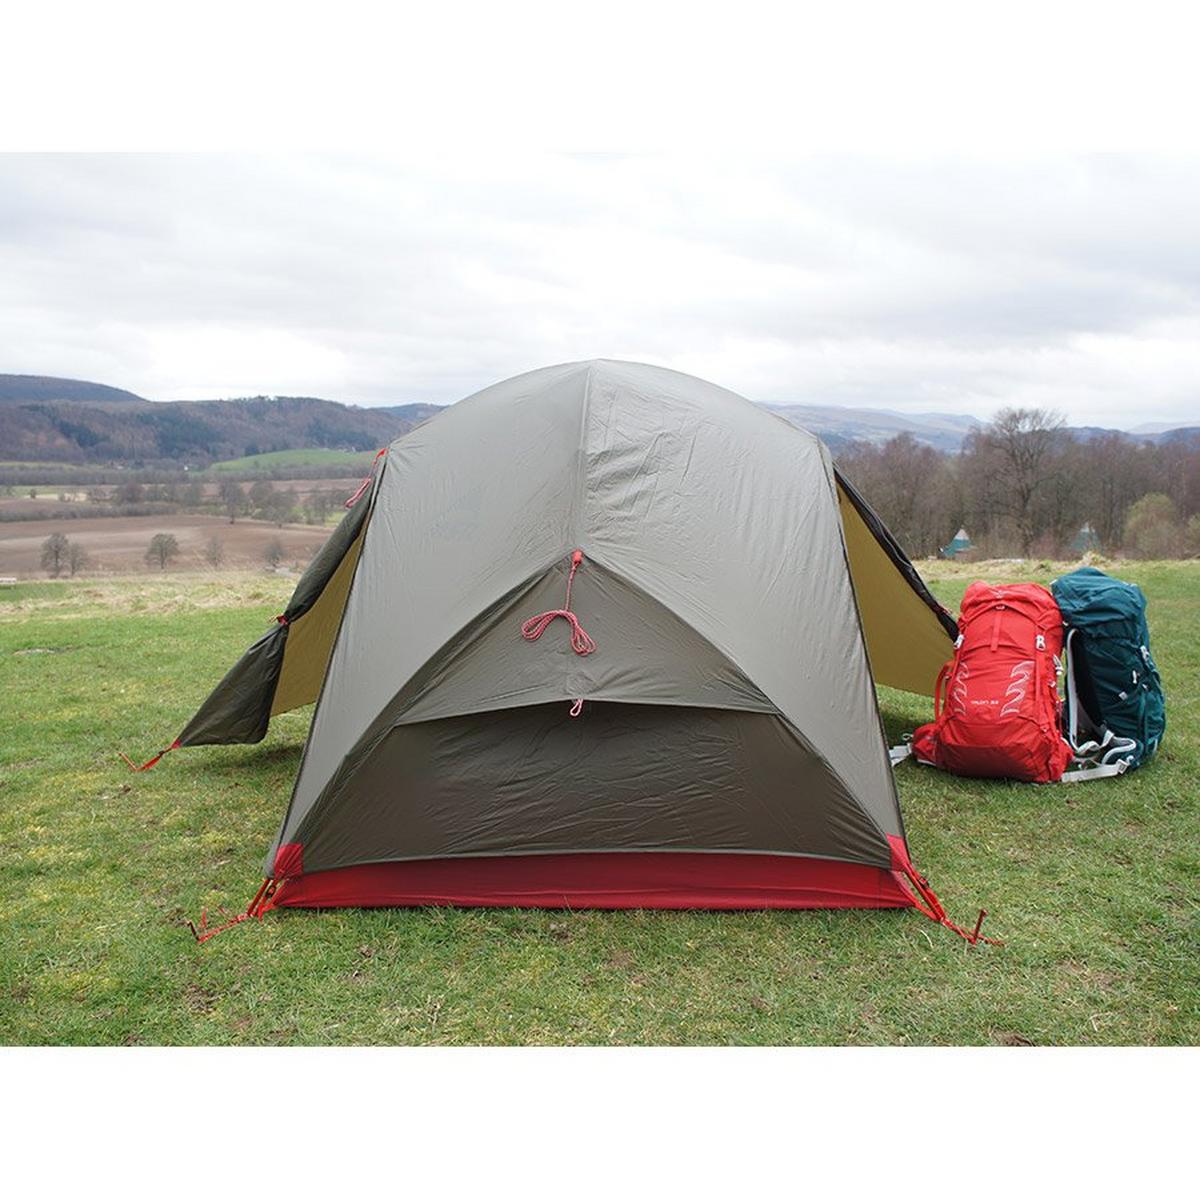 MSR Hubba Hubba NX | Two Person Tent